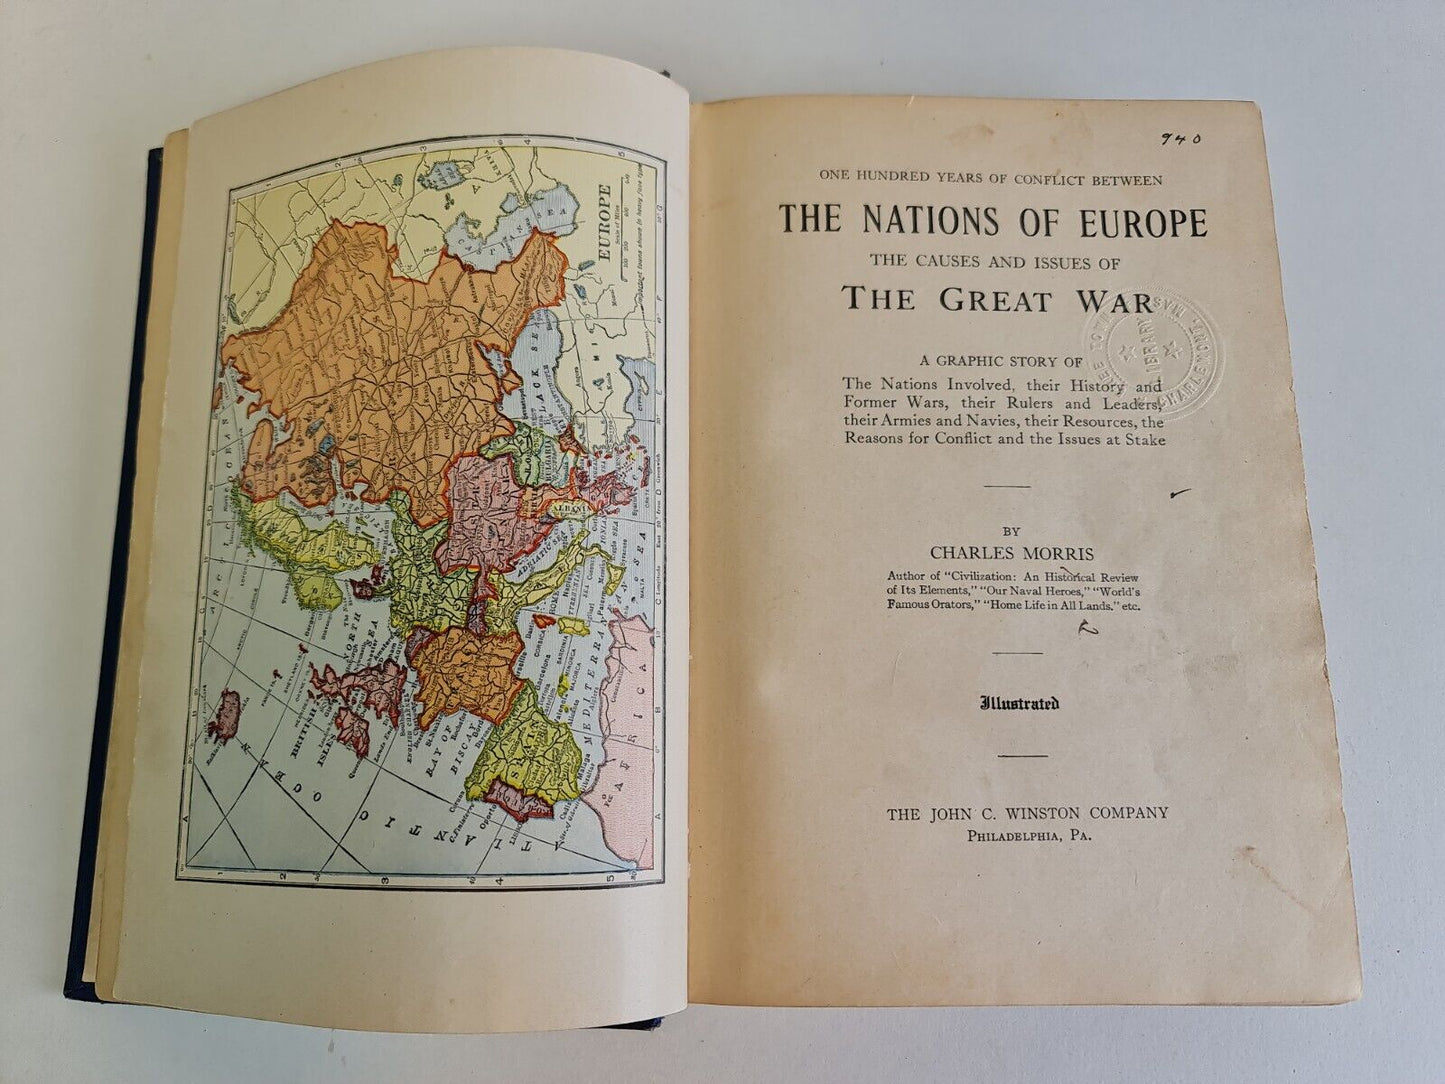 One Hundred Years of Conflict between the Nations of Europe by C Morris (1914)